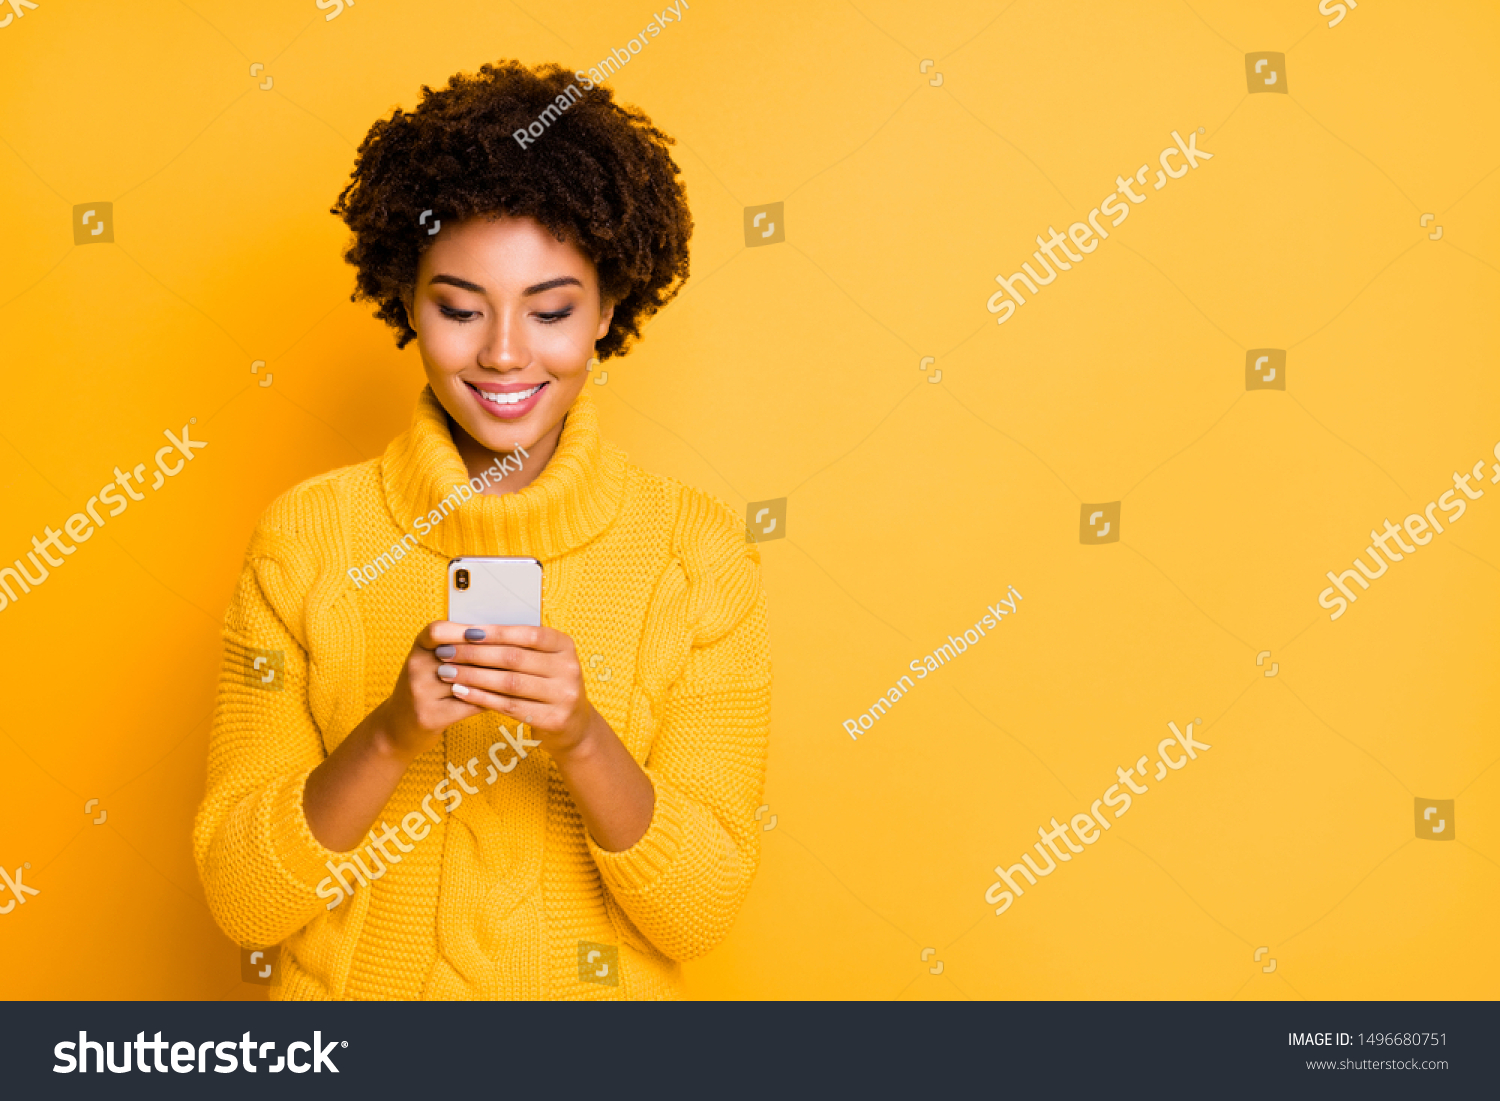 Copyspace photo of cheerful cute charming girlfriend browsing through her smartphone wearing pullover addicted to social media isolated with vibrant color background #1496680751